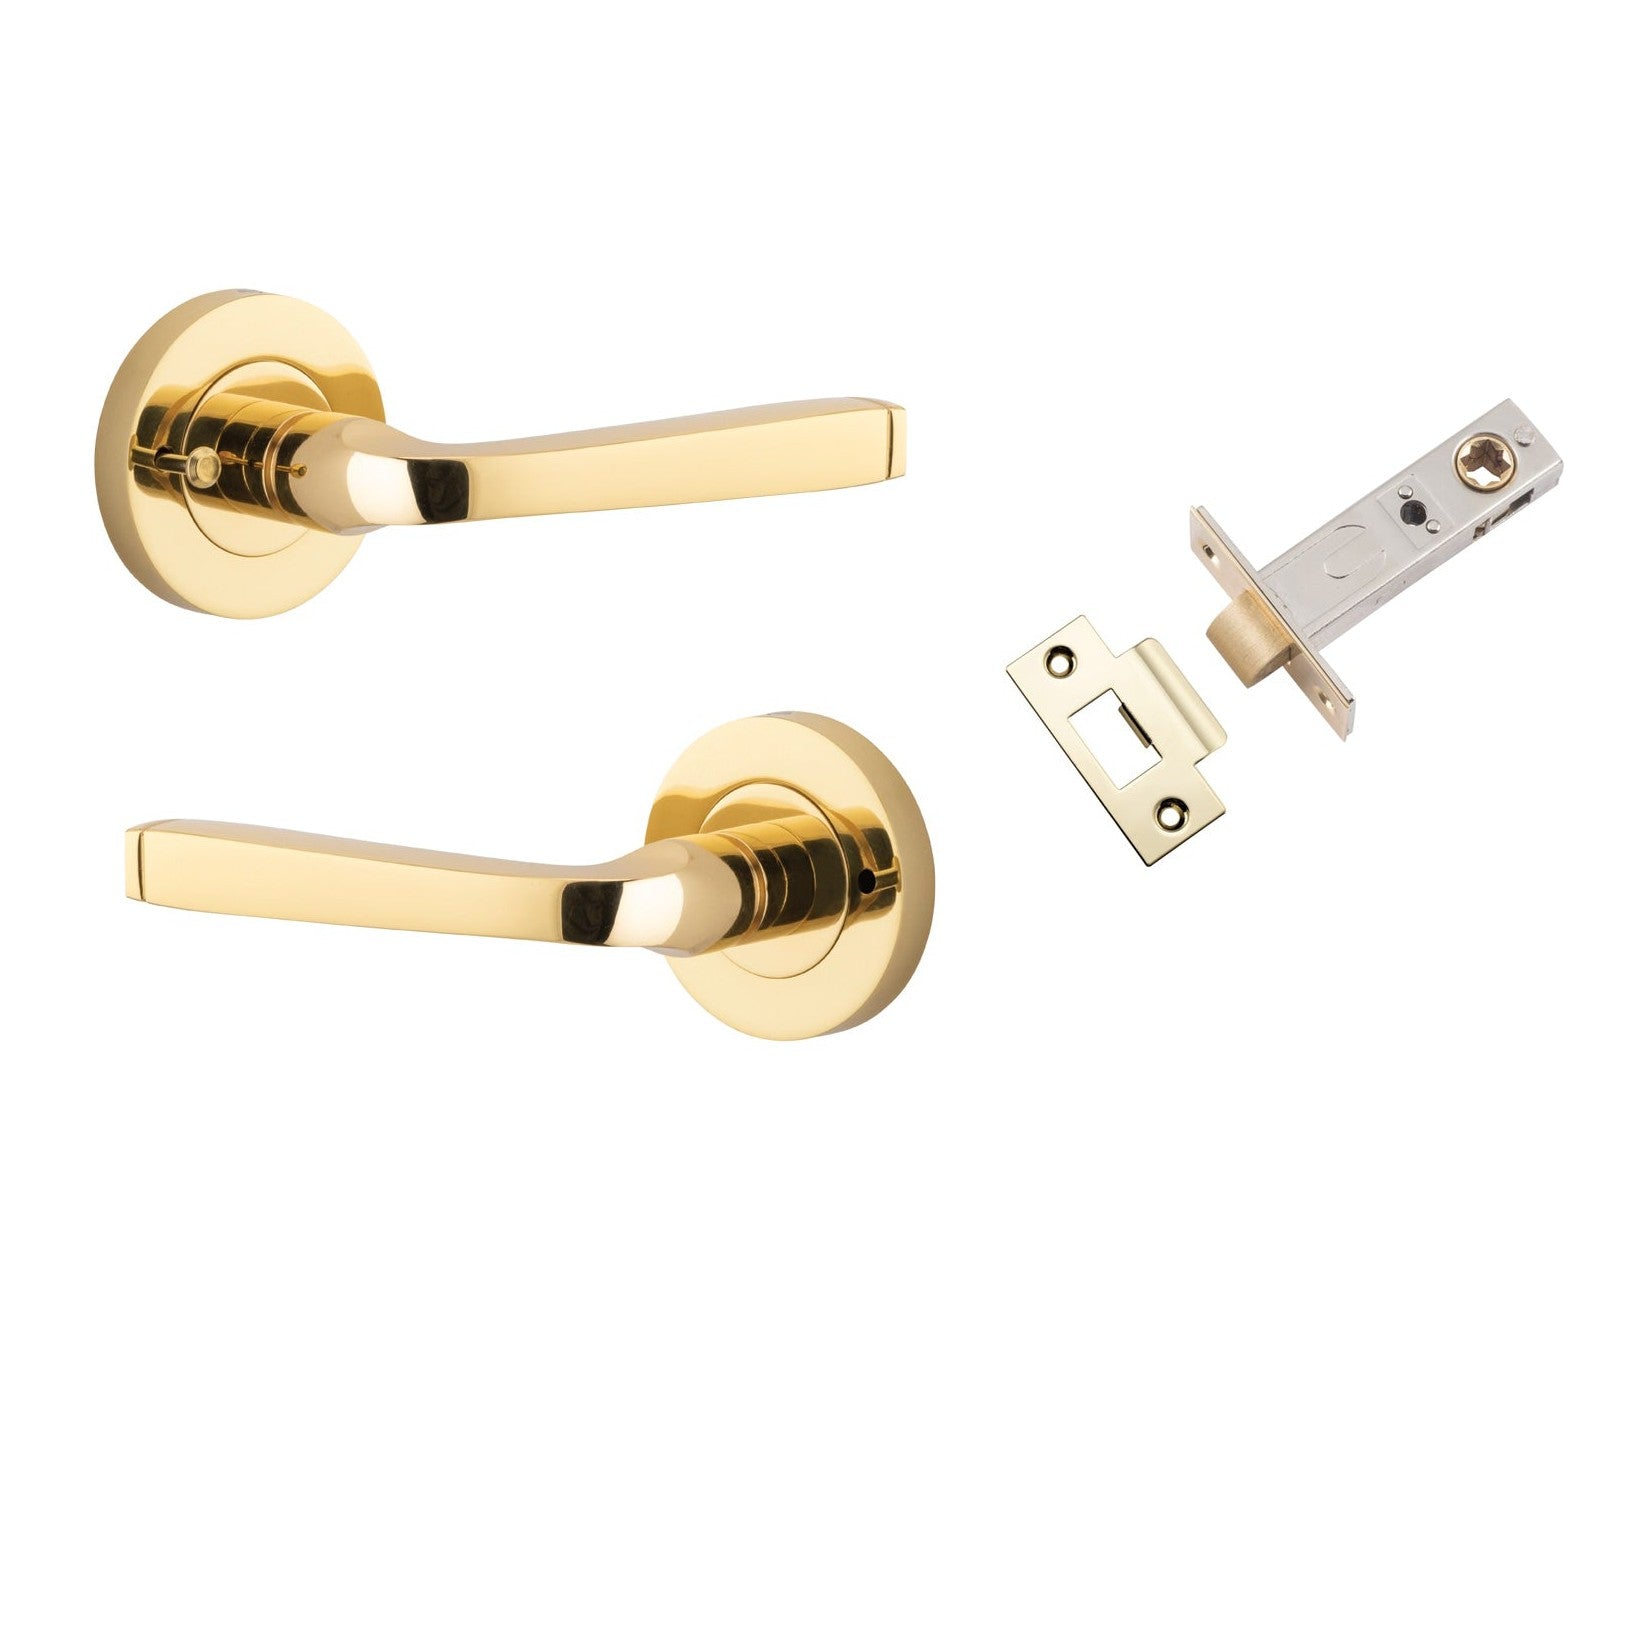 Iver Door Handle Annecy Round Rose Inbuilt Privacy Pair Kit Polished Brass